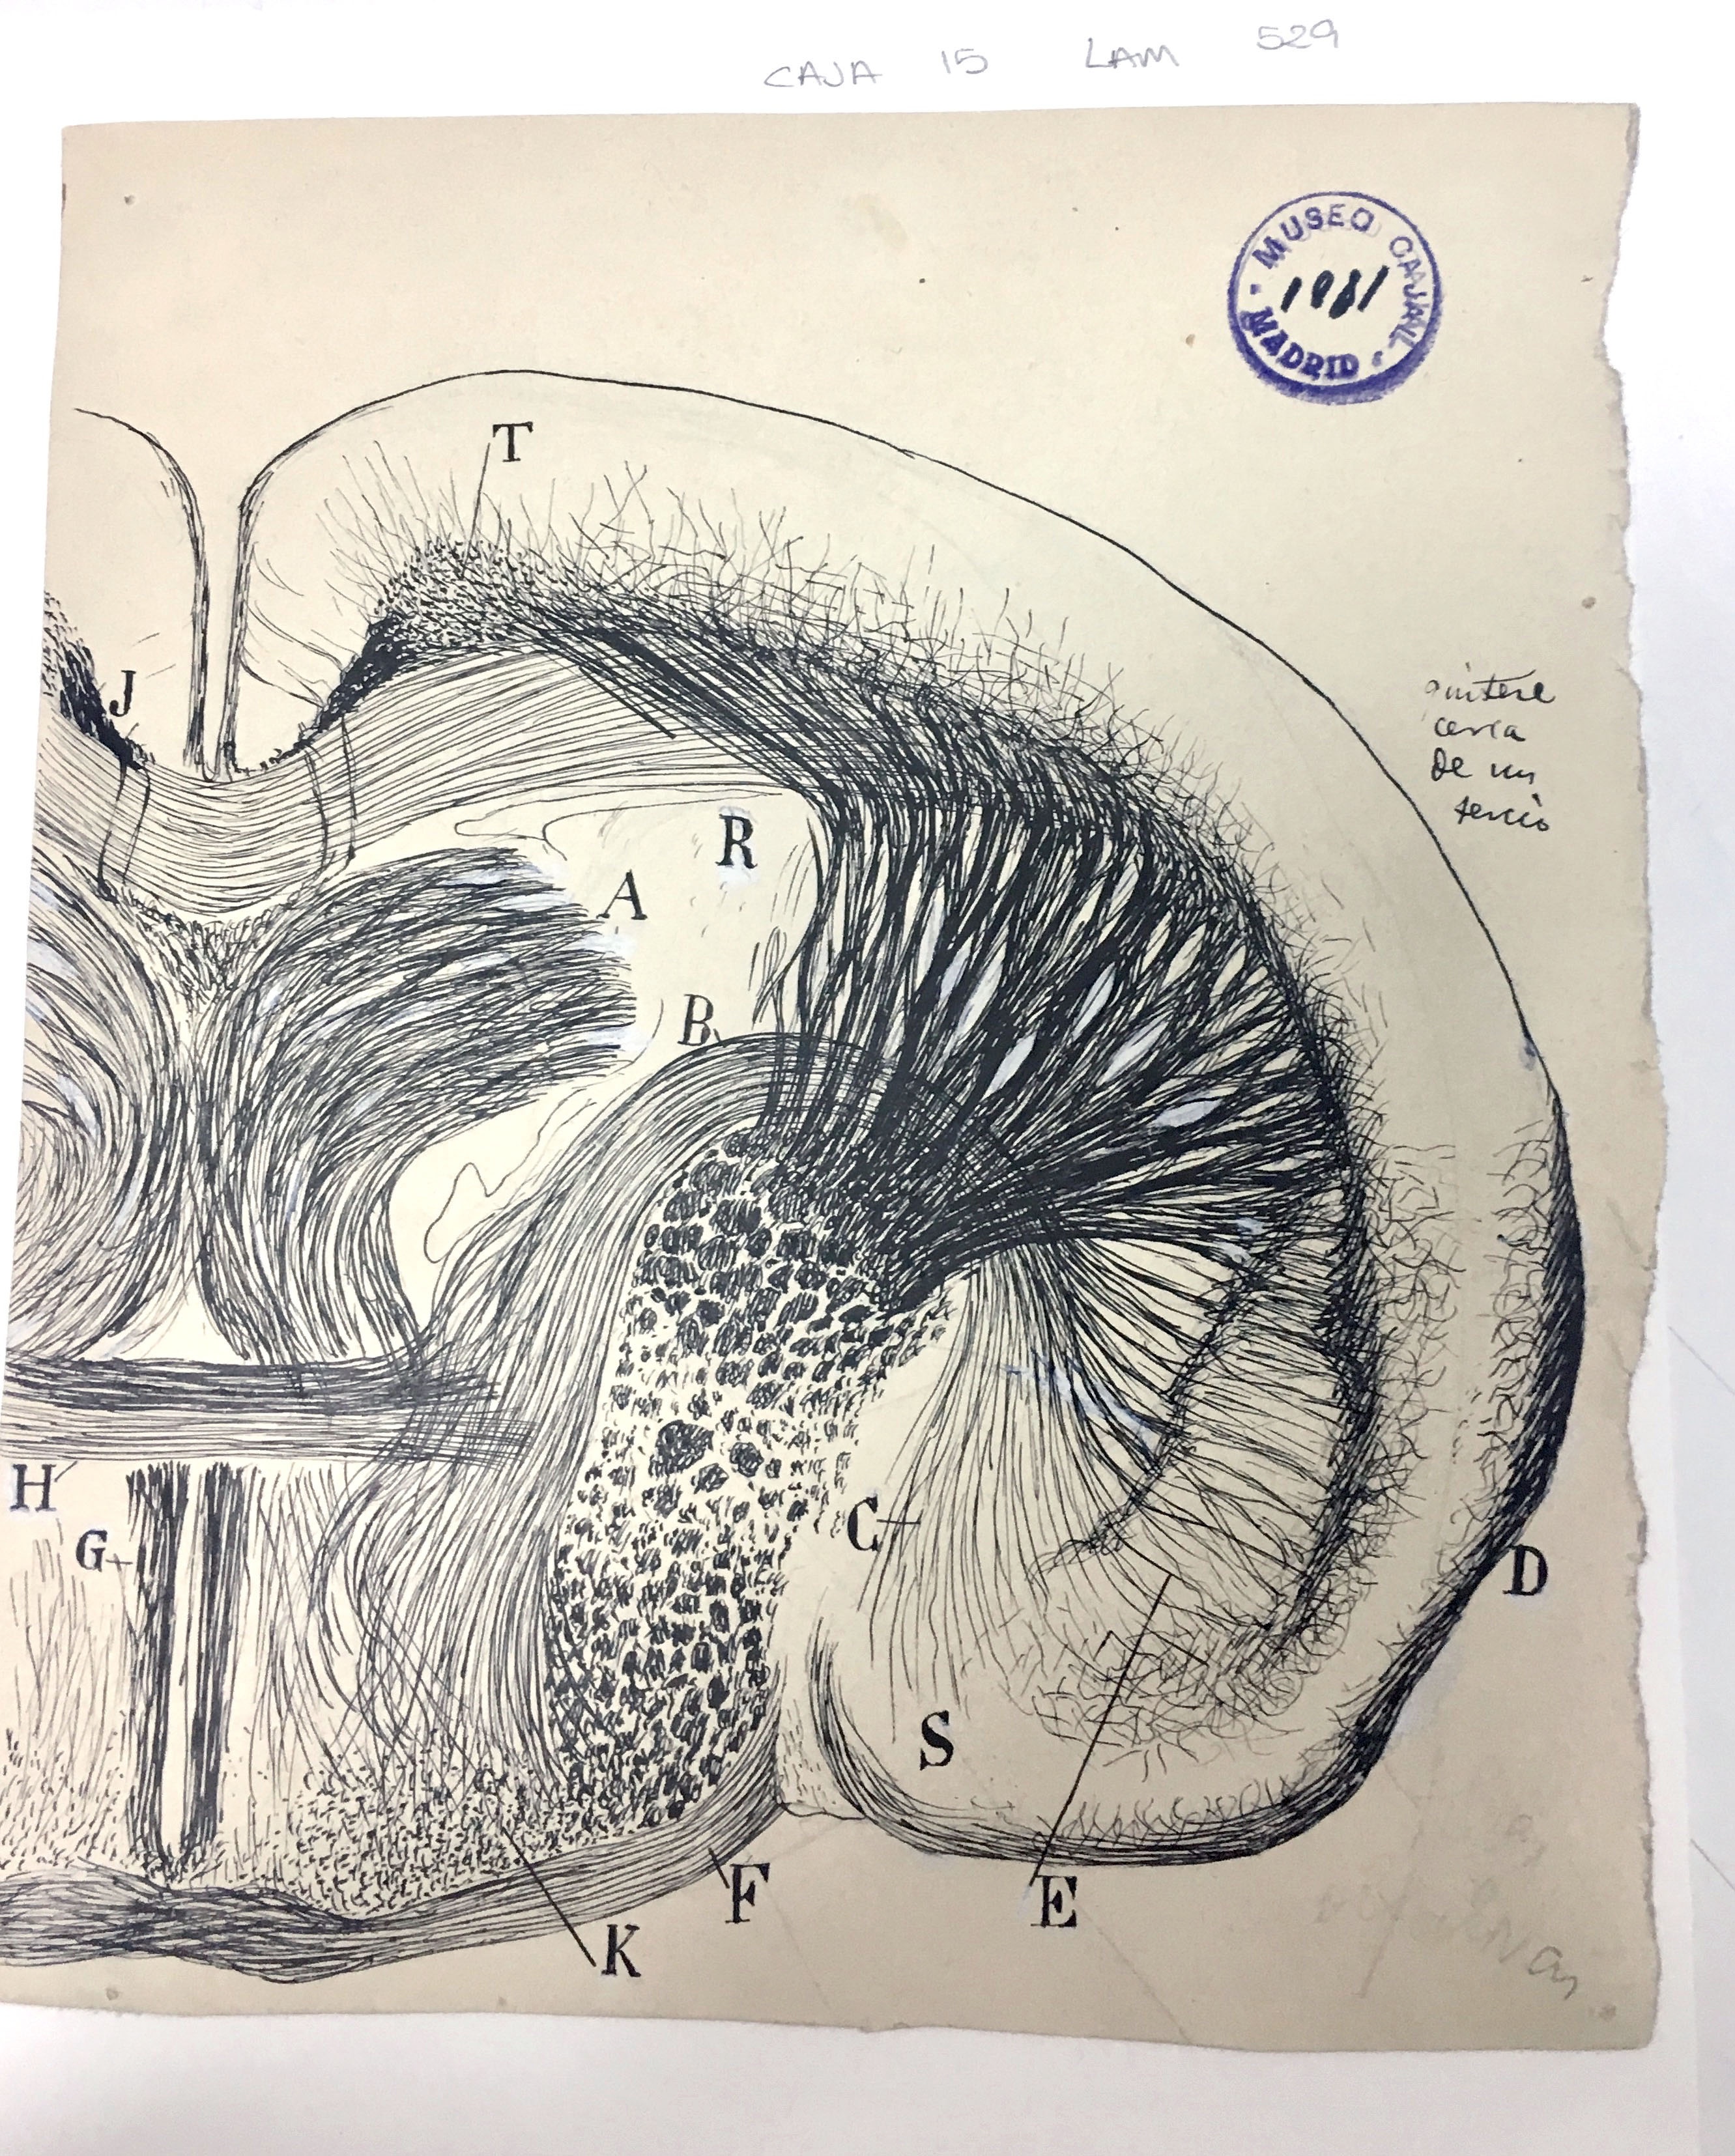 Hand-drawn illustration of a coronal brain section of a young mouse